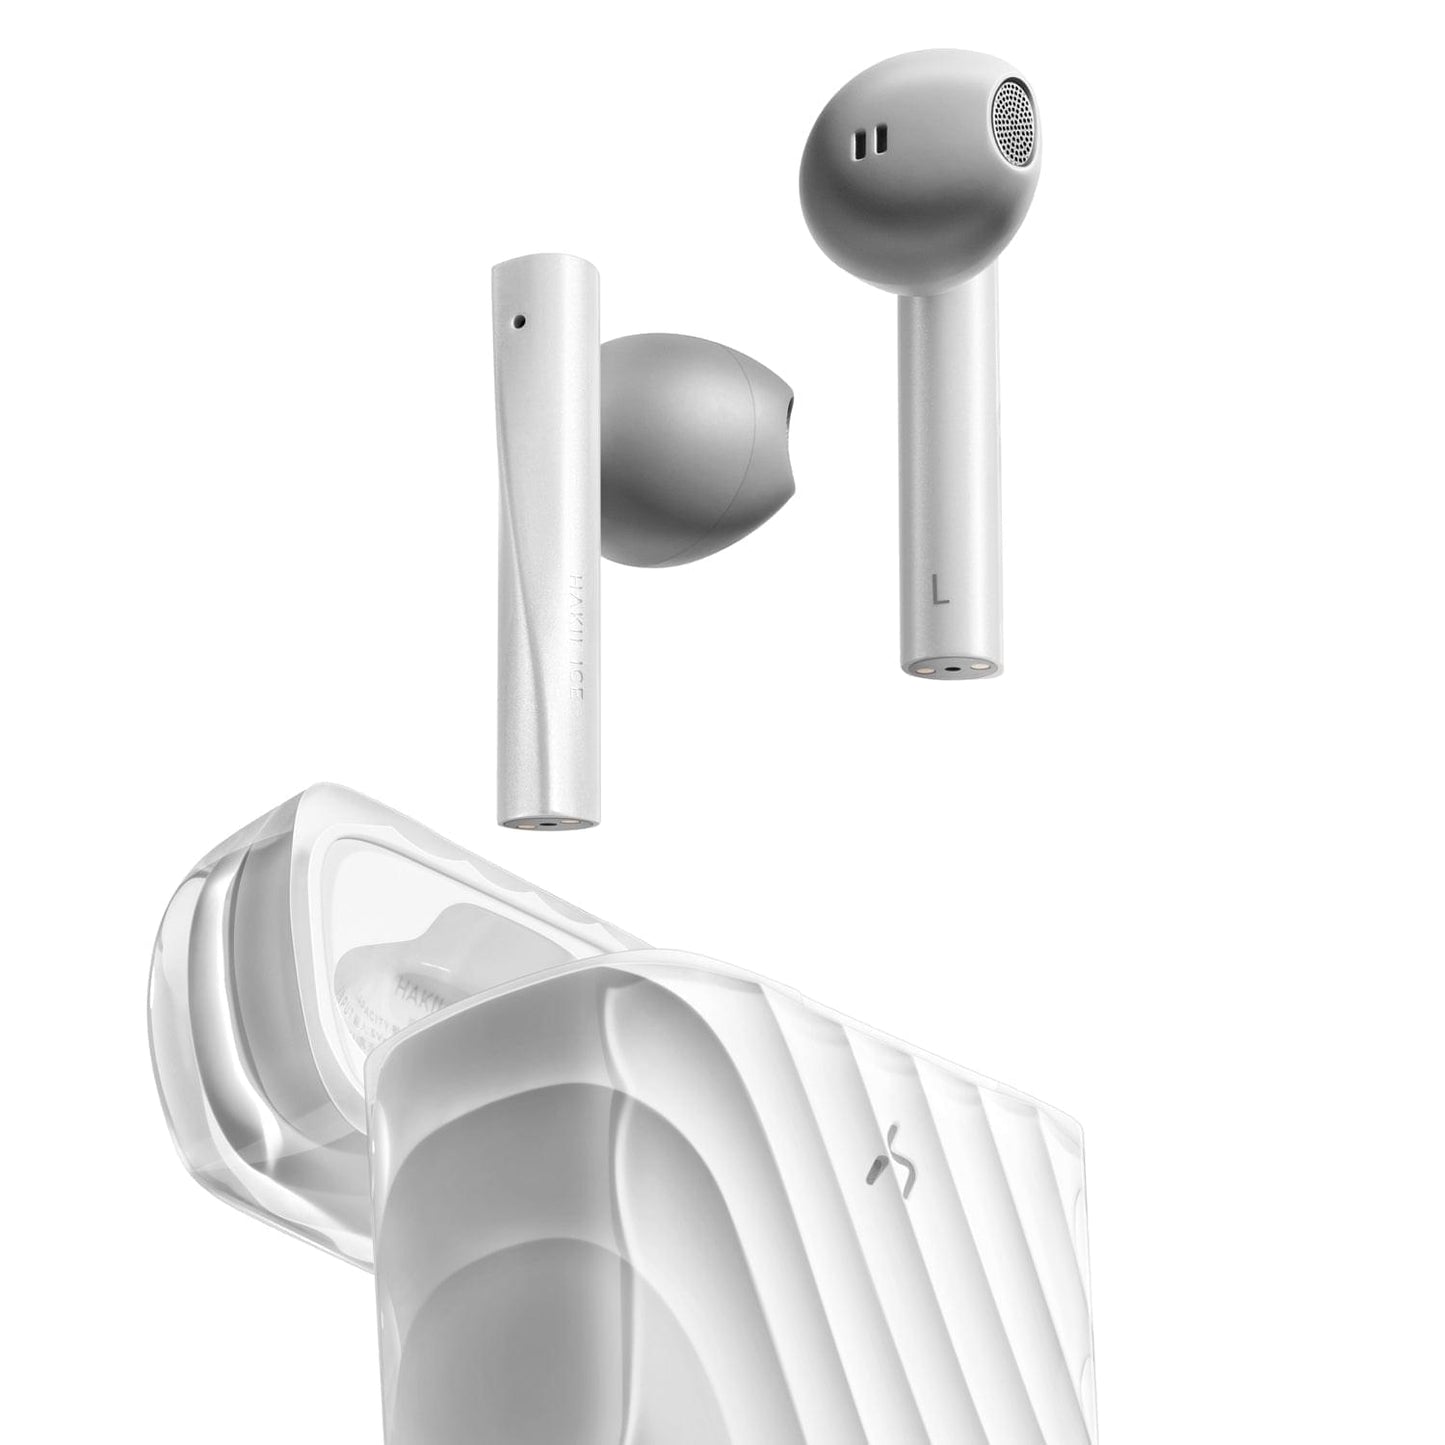 HAKII ICE Low Latency Wireless Earbuds for Android & iPhone (White)